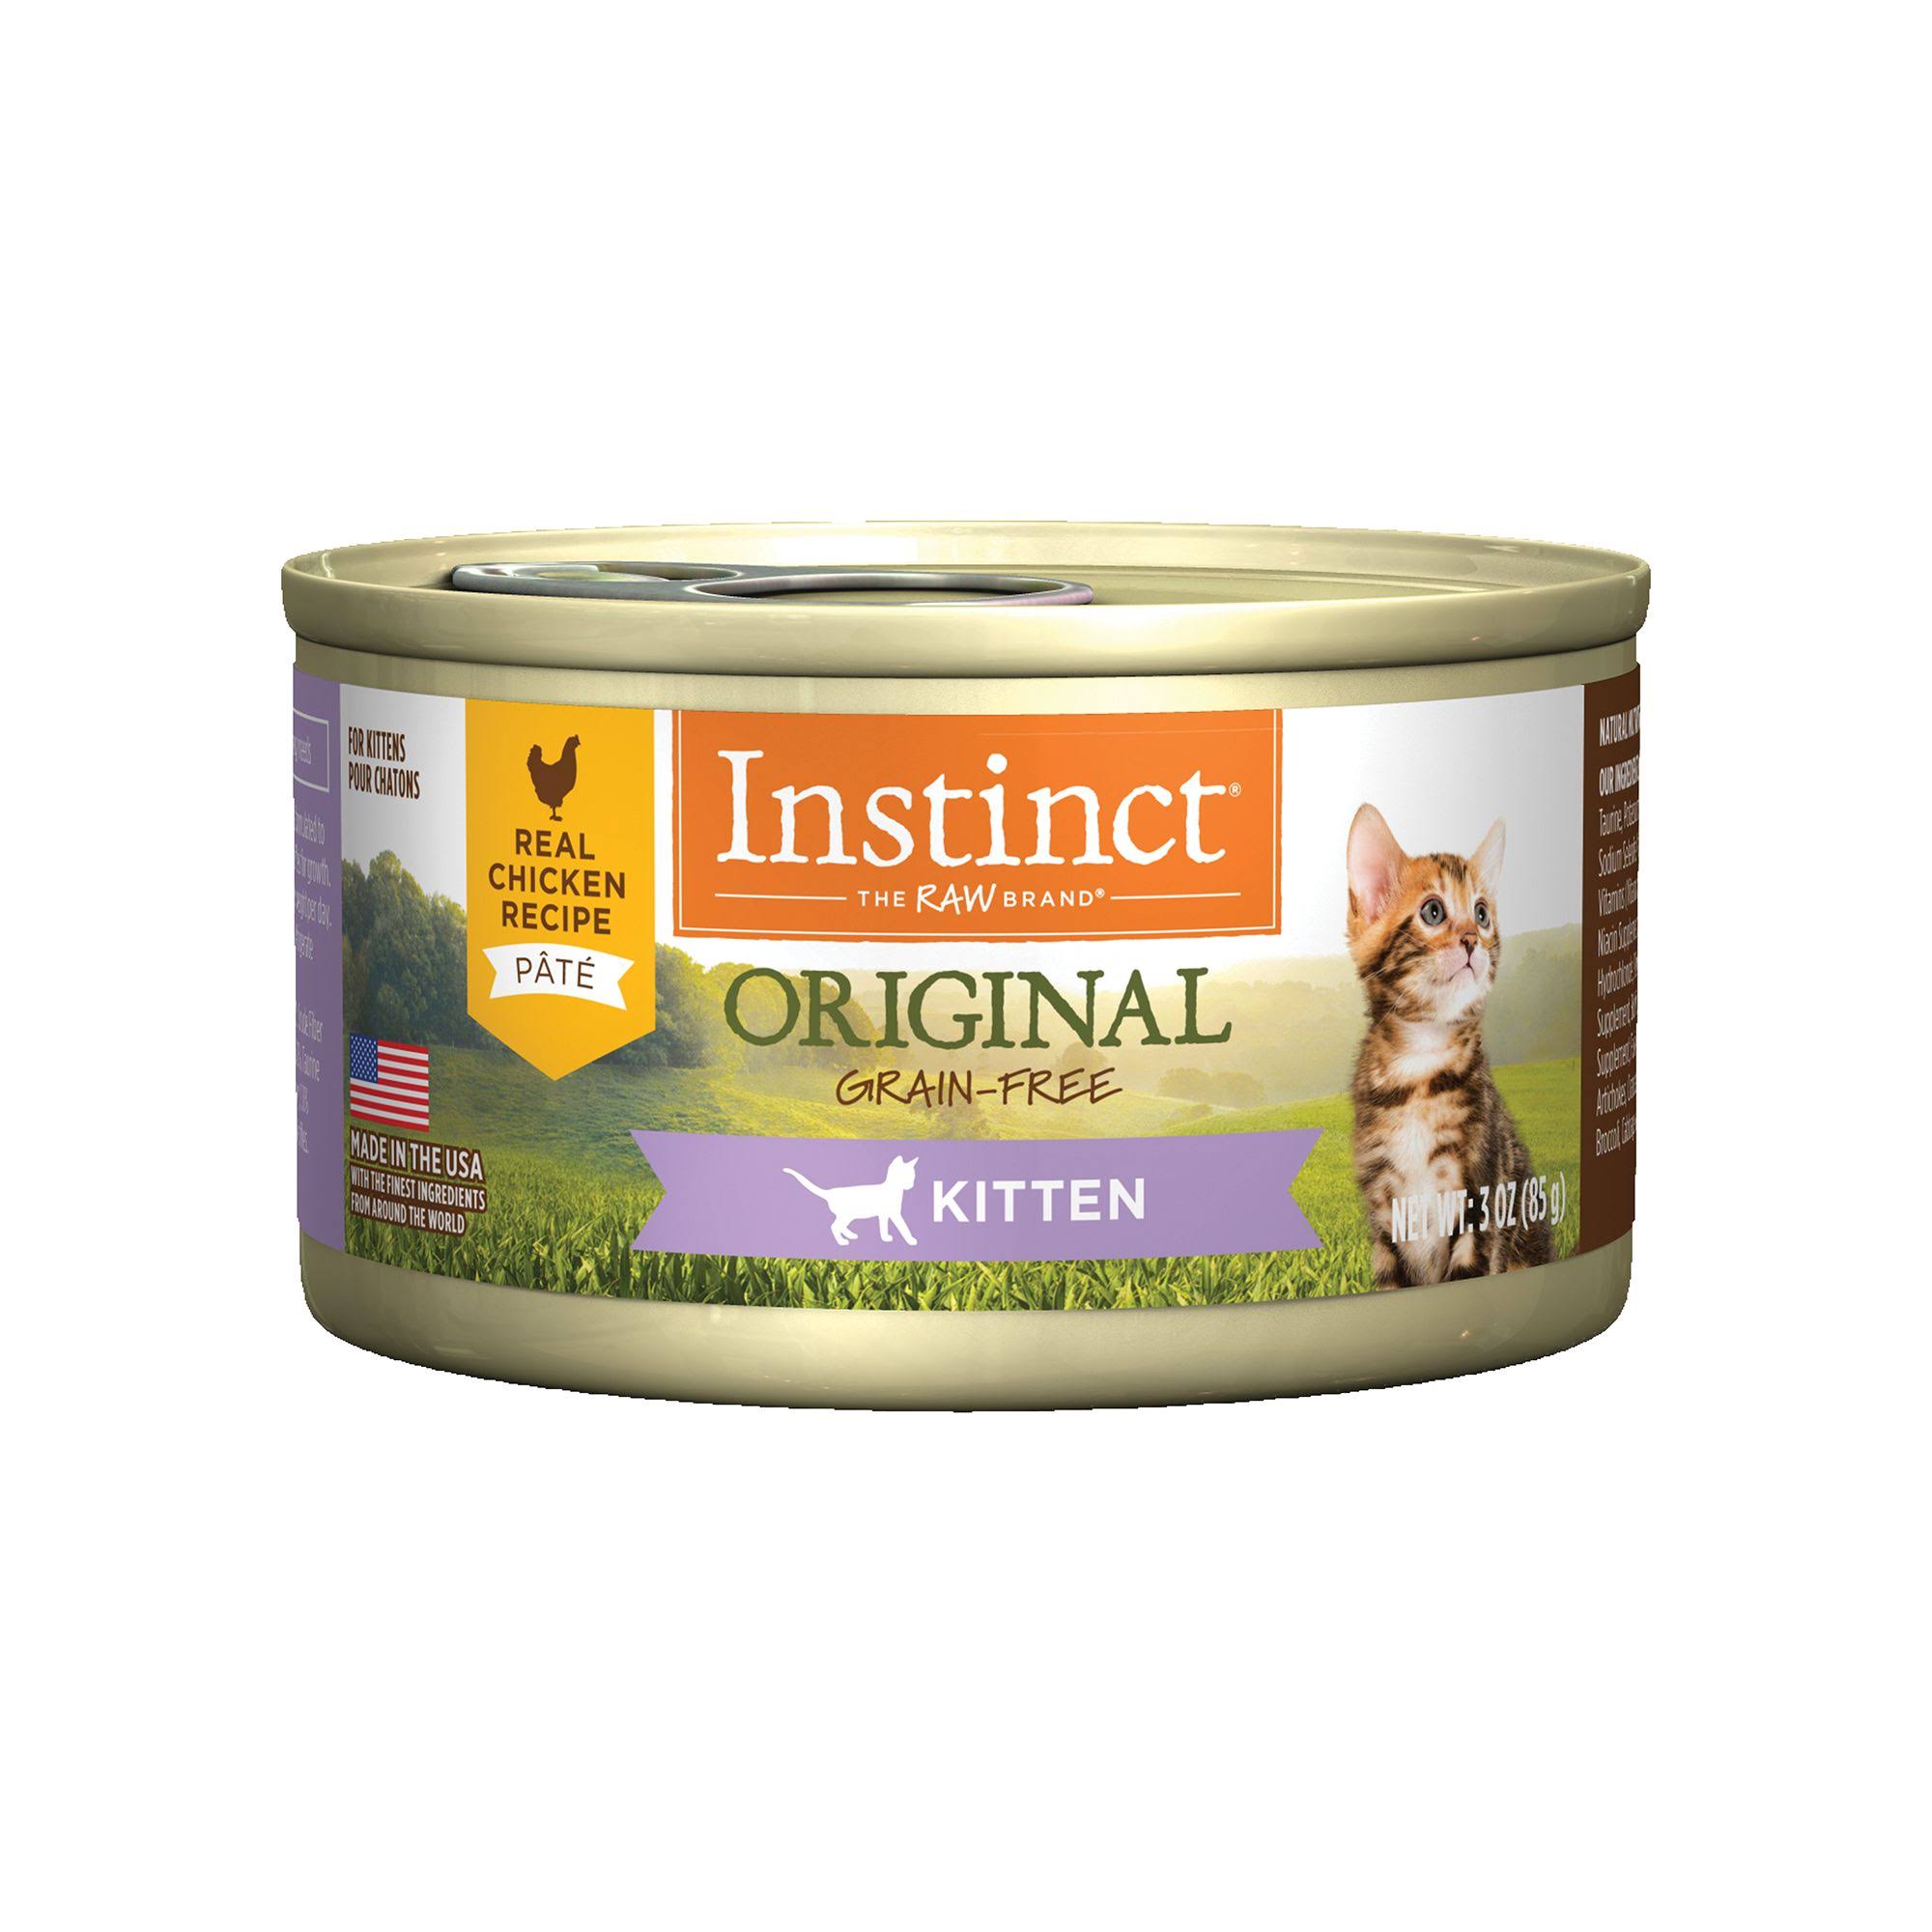 Instinct Kitted Food - Real Chicken Recipe, 85g